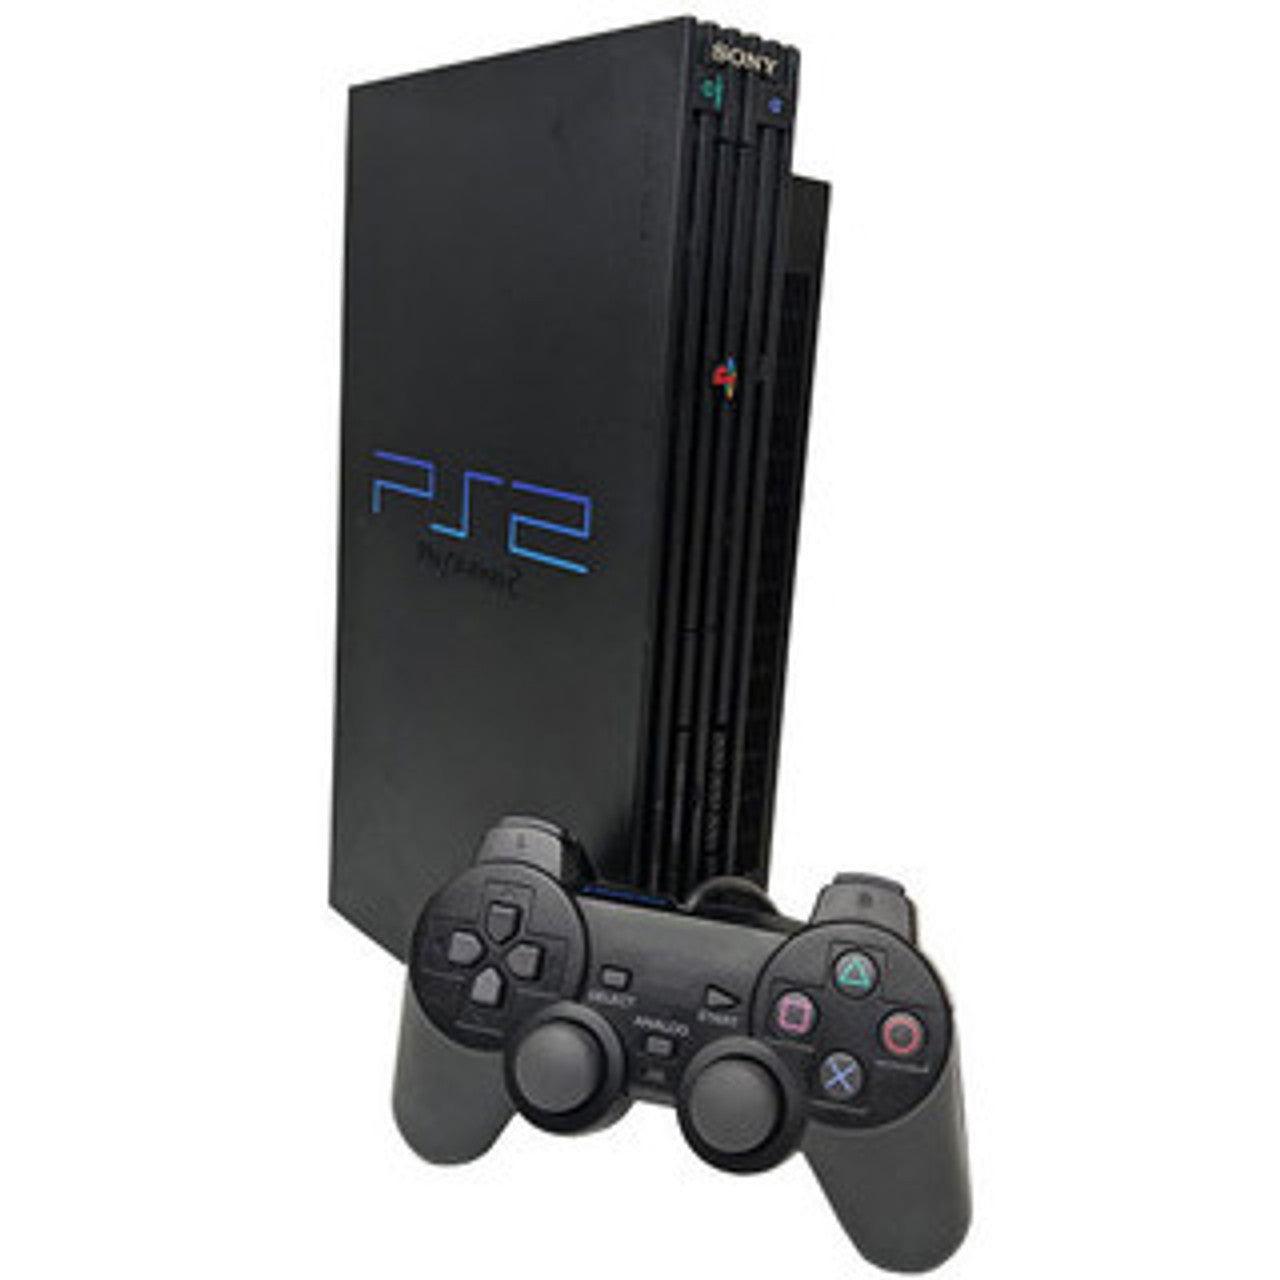 Sony Playstation 2 Phat Console - PS2 Fat Black (PAL / NTSC) - (USED)